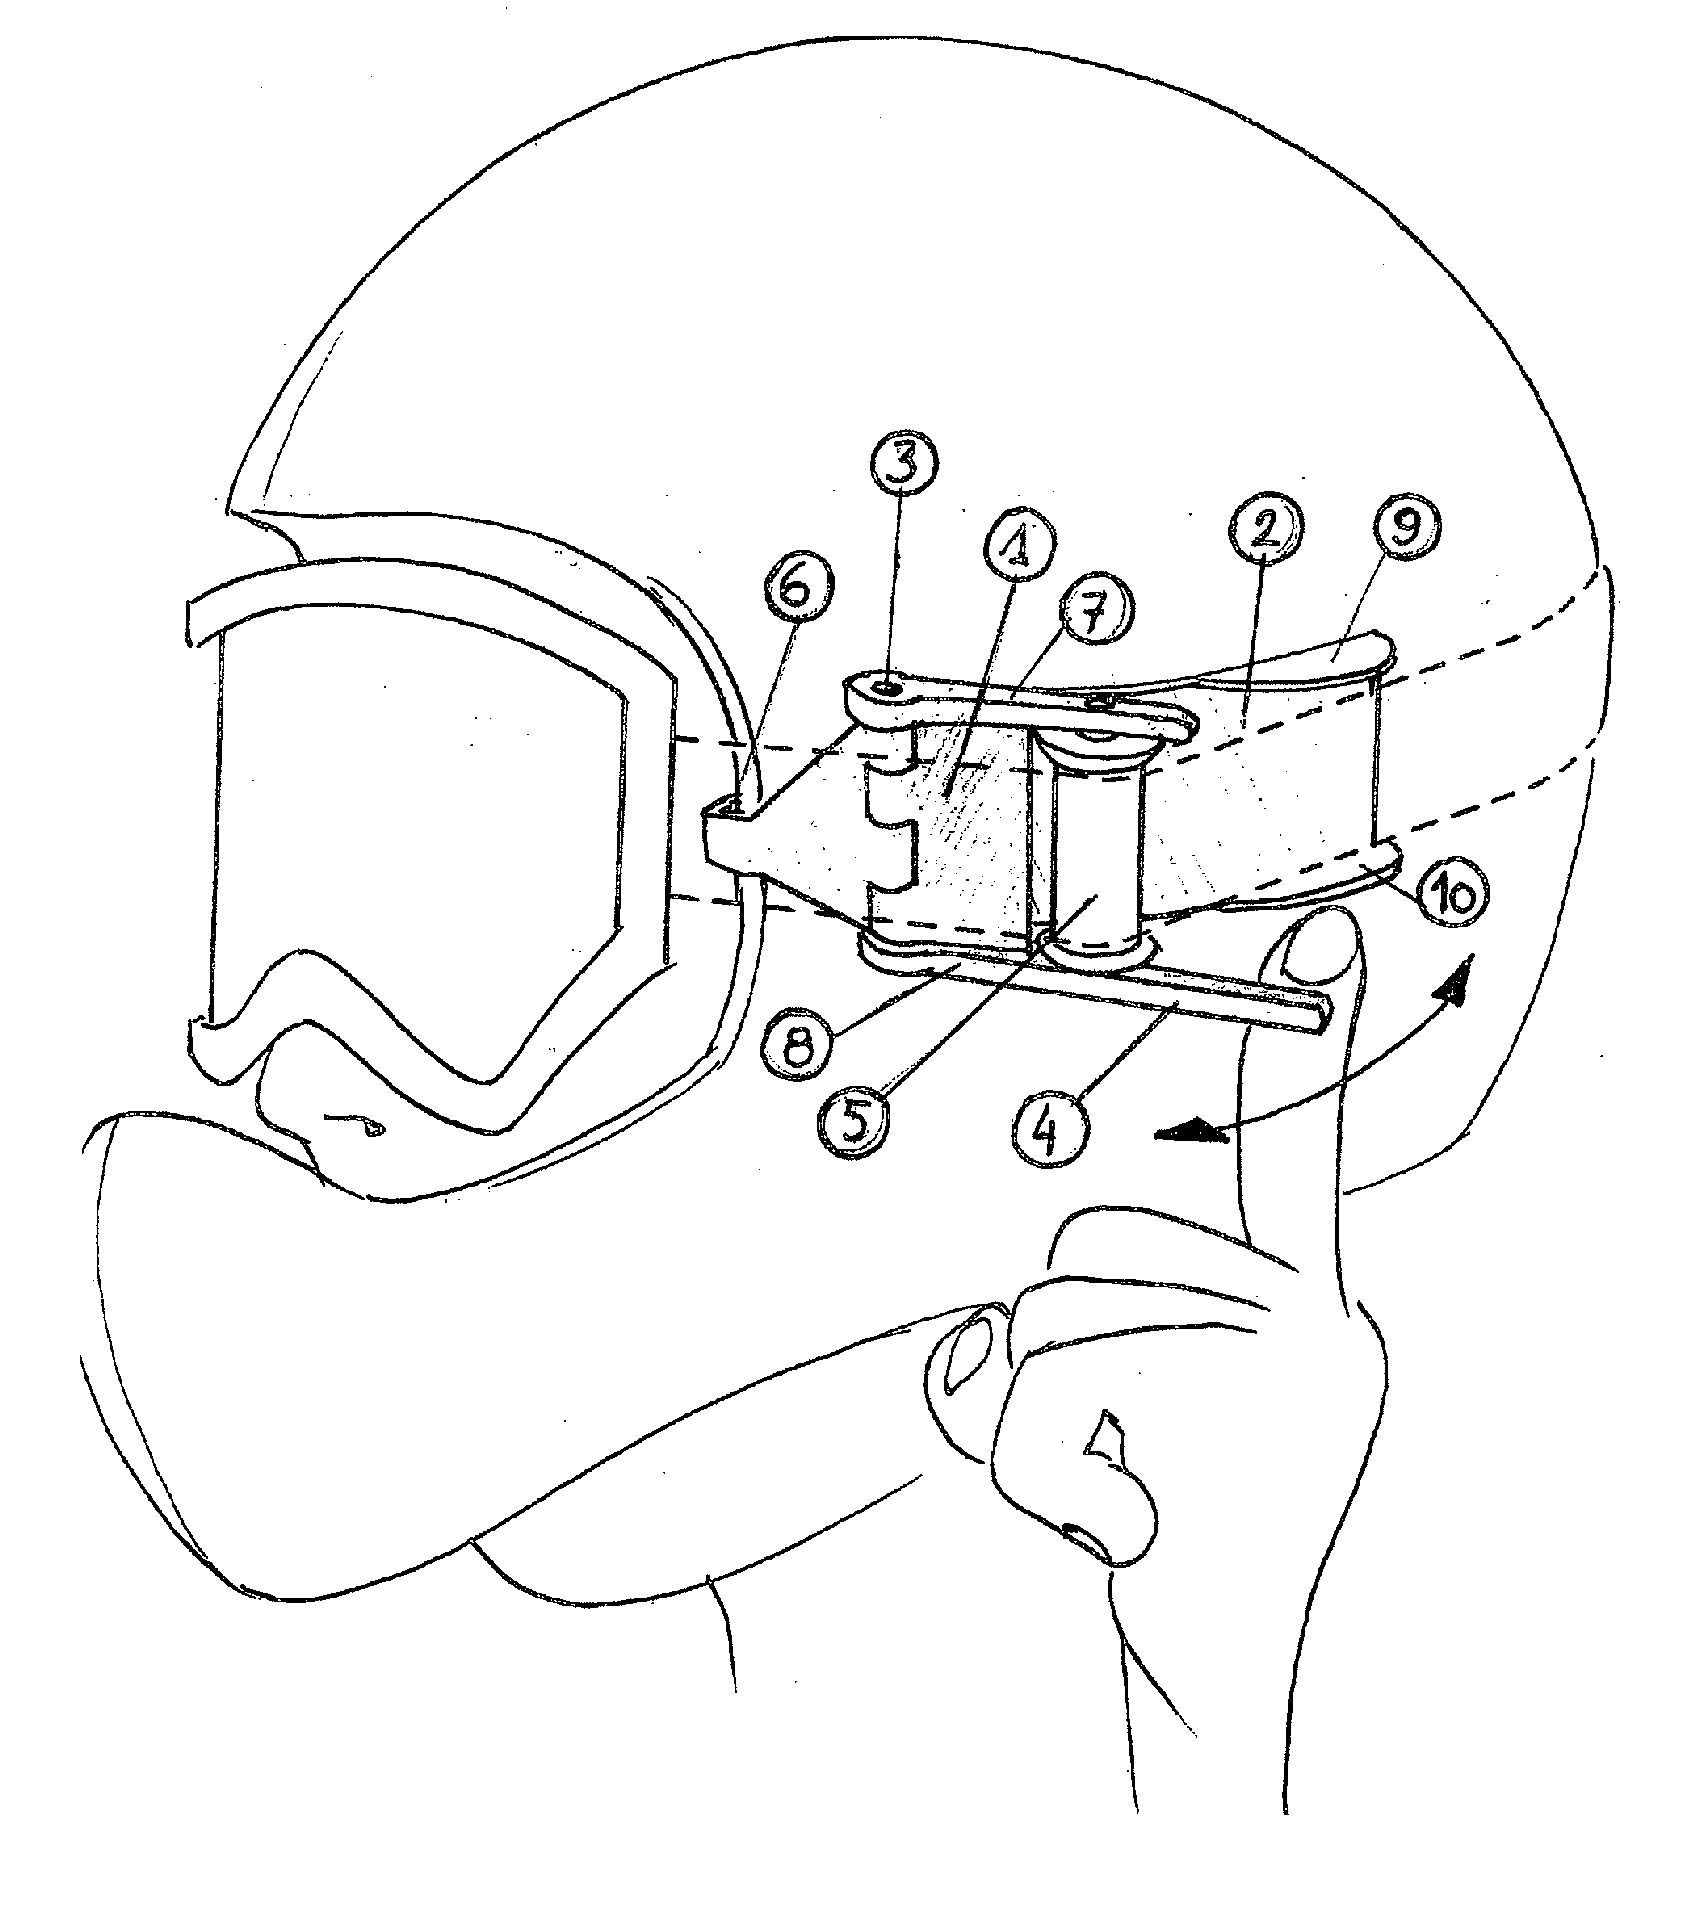 Device for separating, and maintaining a distance between, a person's face and a protective eye mask held in place by an elastic strap (ski or motocross type)